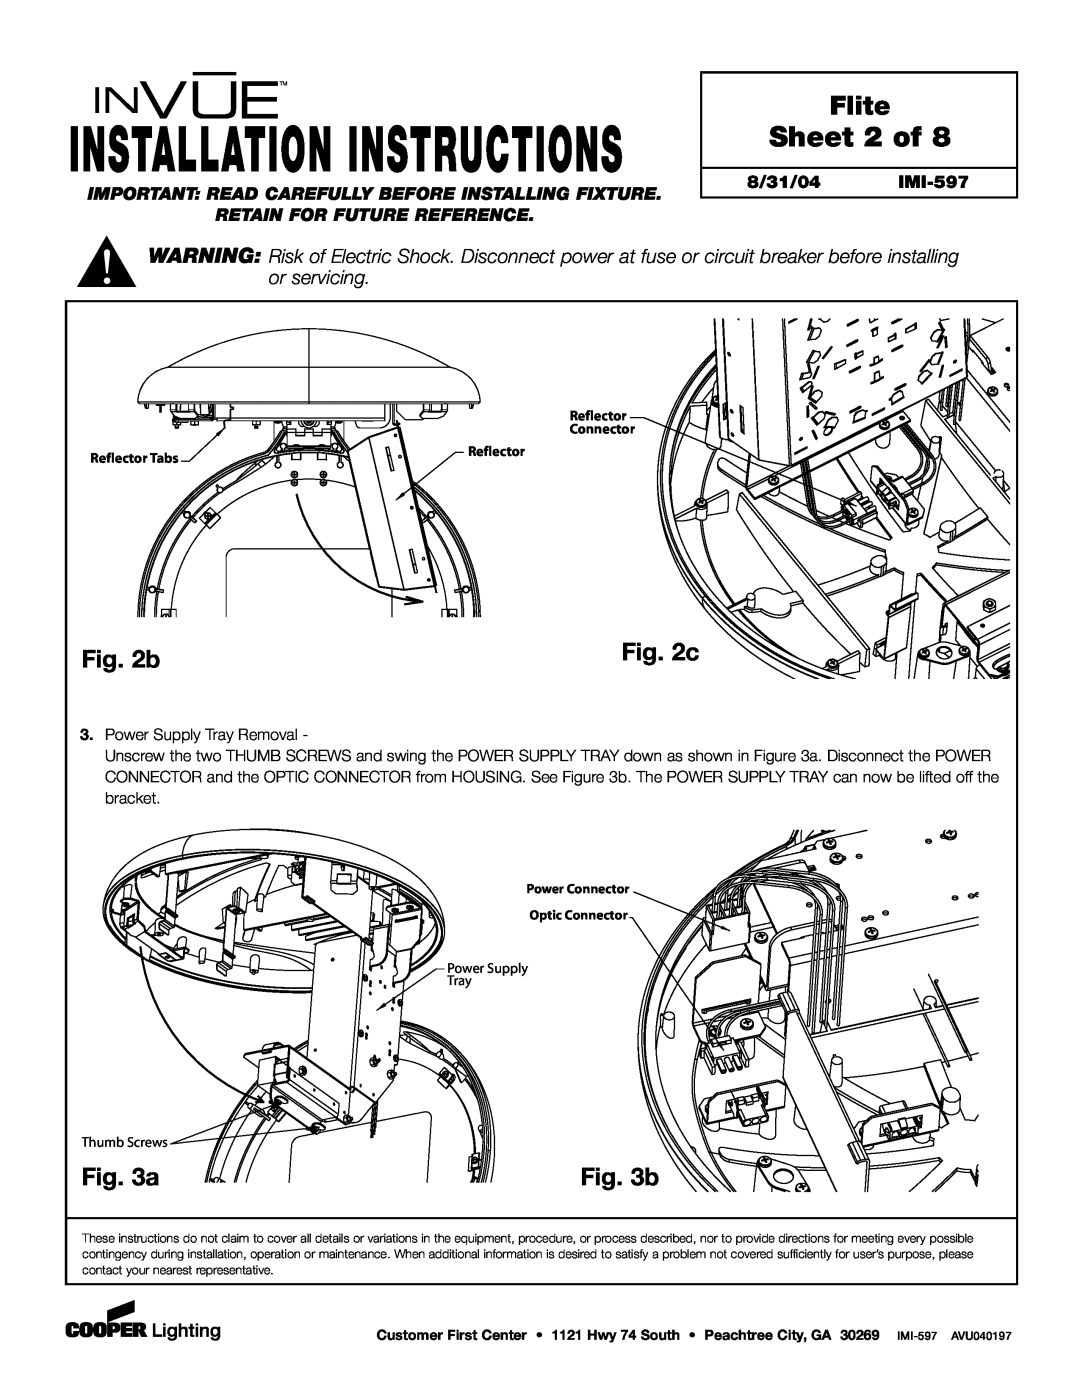 Cooper Lighting Sheet 2 of, b, Installation Instructions, Flite, Retain For Future Reference, 8/31/04 IMI-597 